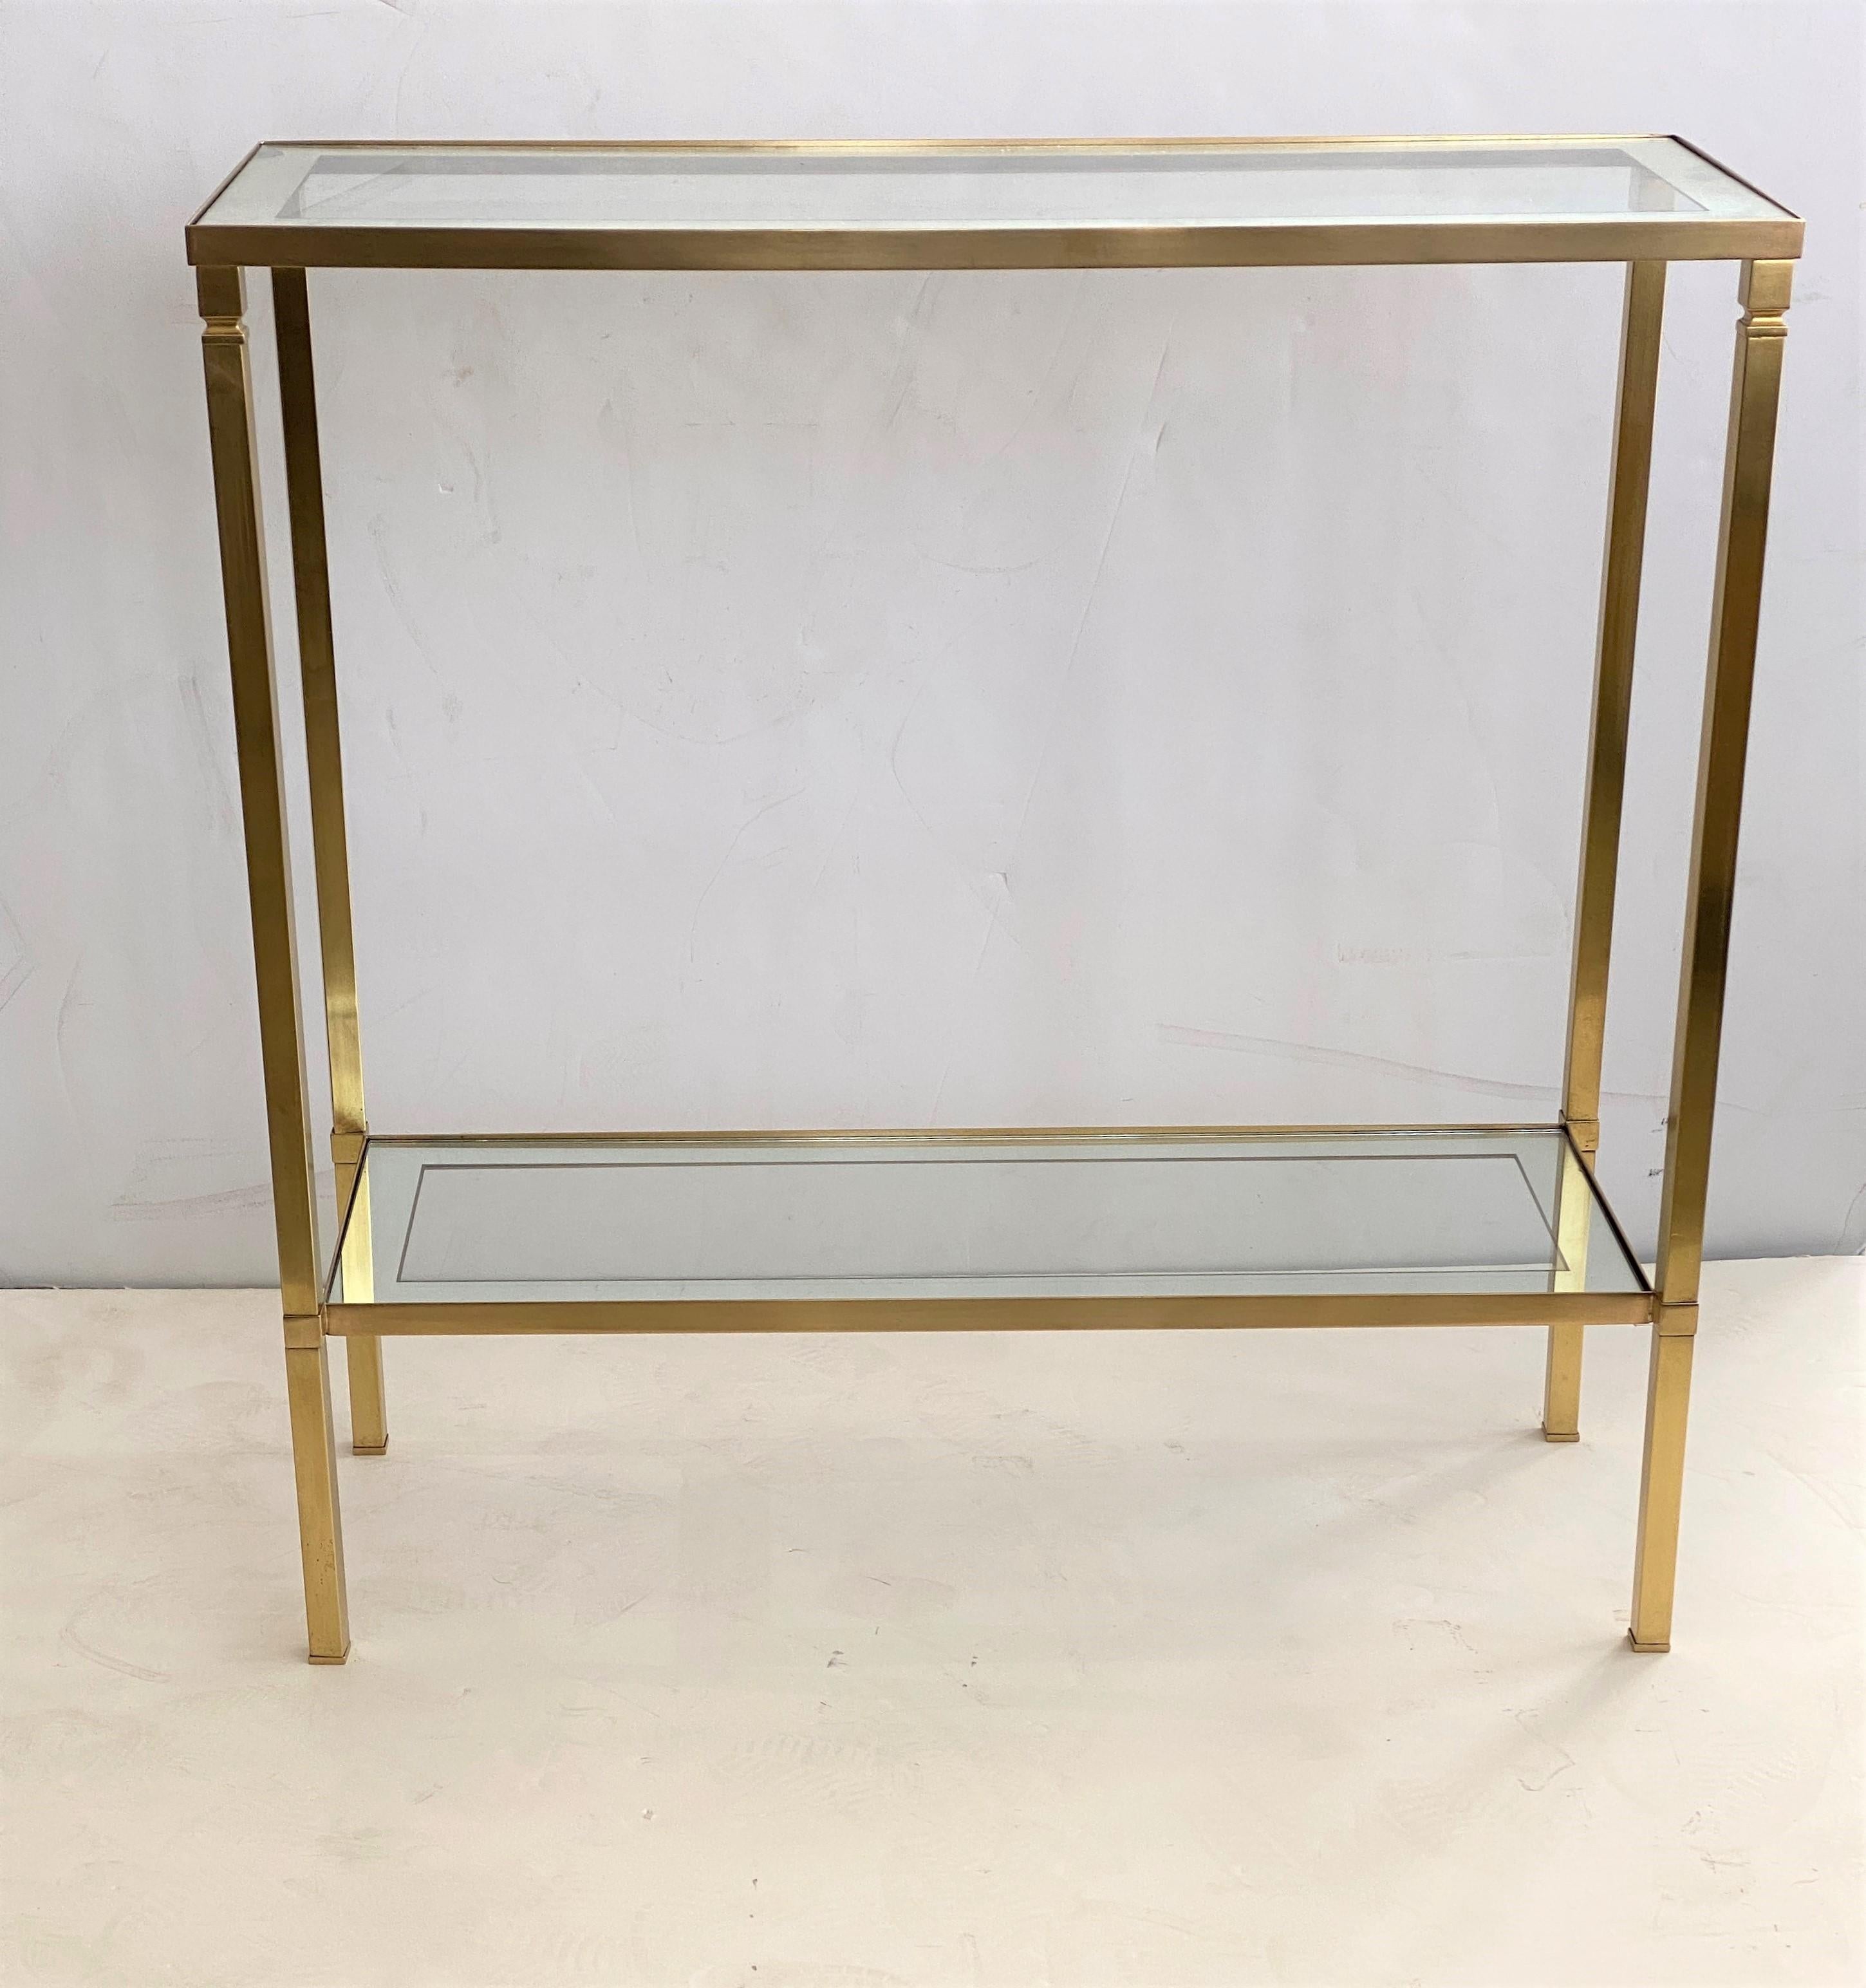 This stylish small scale console is the perfect size for a small area and it is very much in the style of pieces created by Mastercraft. The inset shelves are clear glass with a mirrored band.

Note: There is some loss of mirror on the top shelf